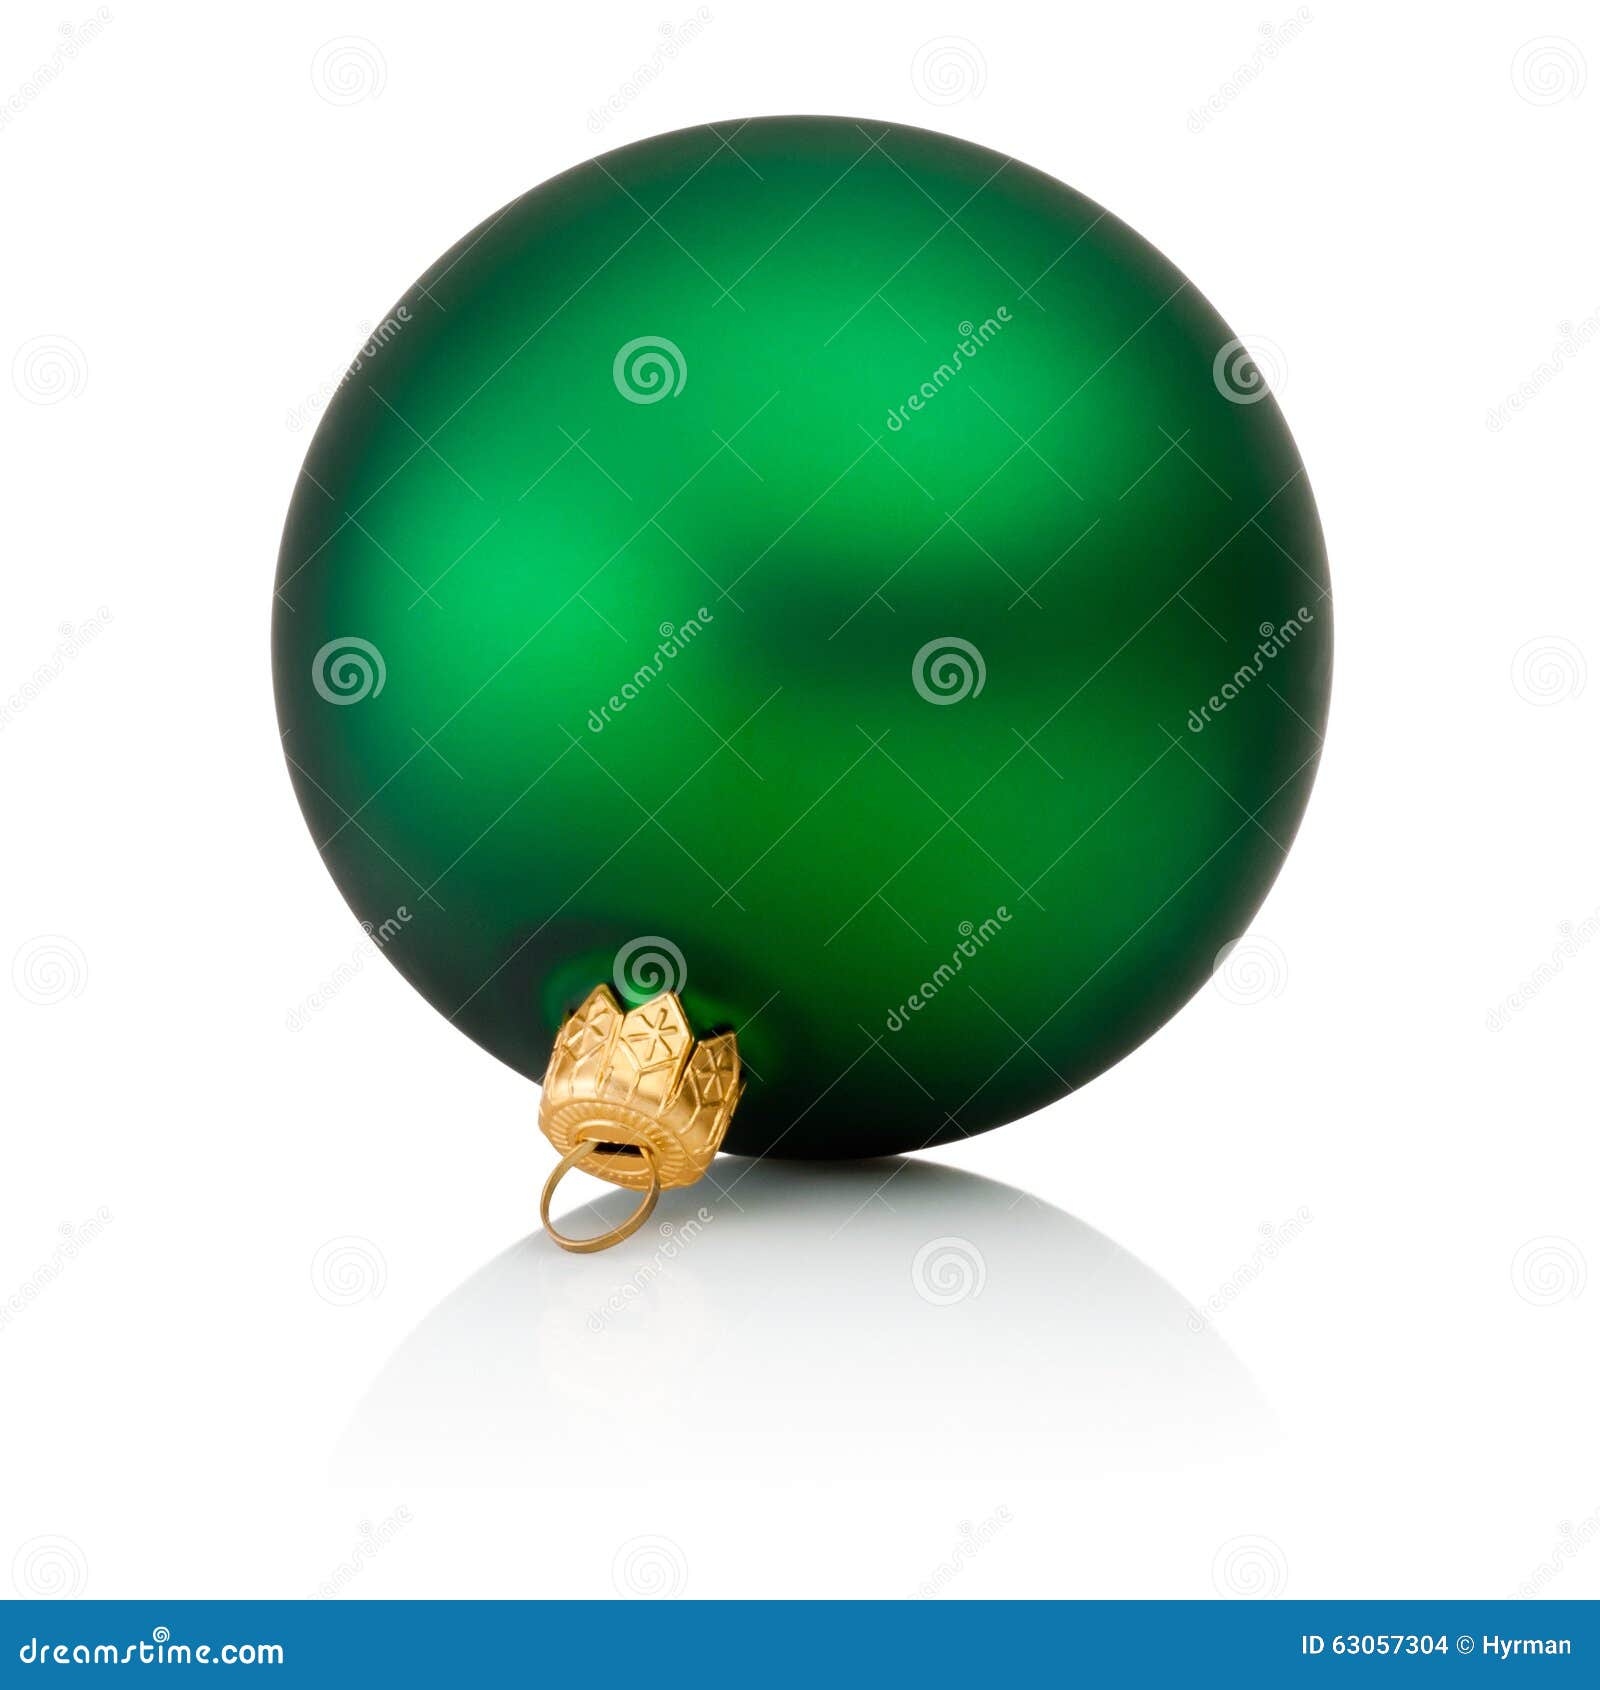 Green Christmas Ball Isolated on White Background Stock Photo - Image ...